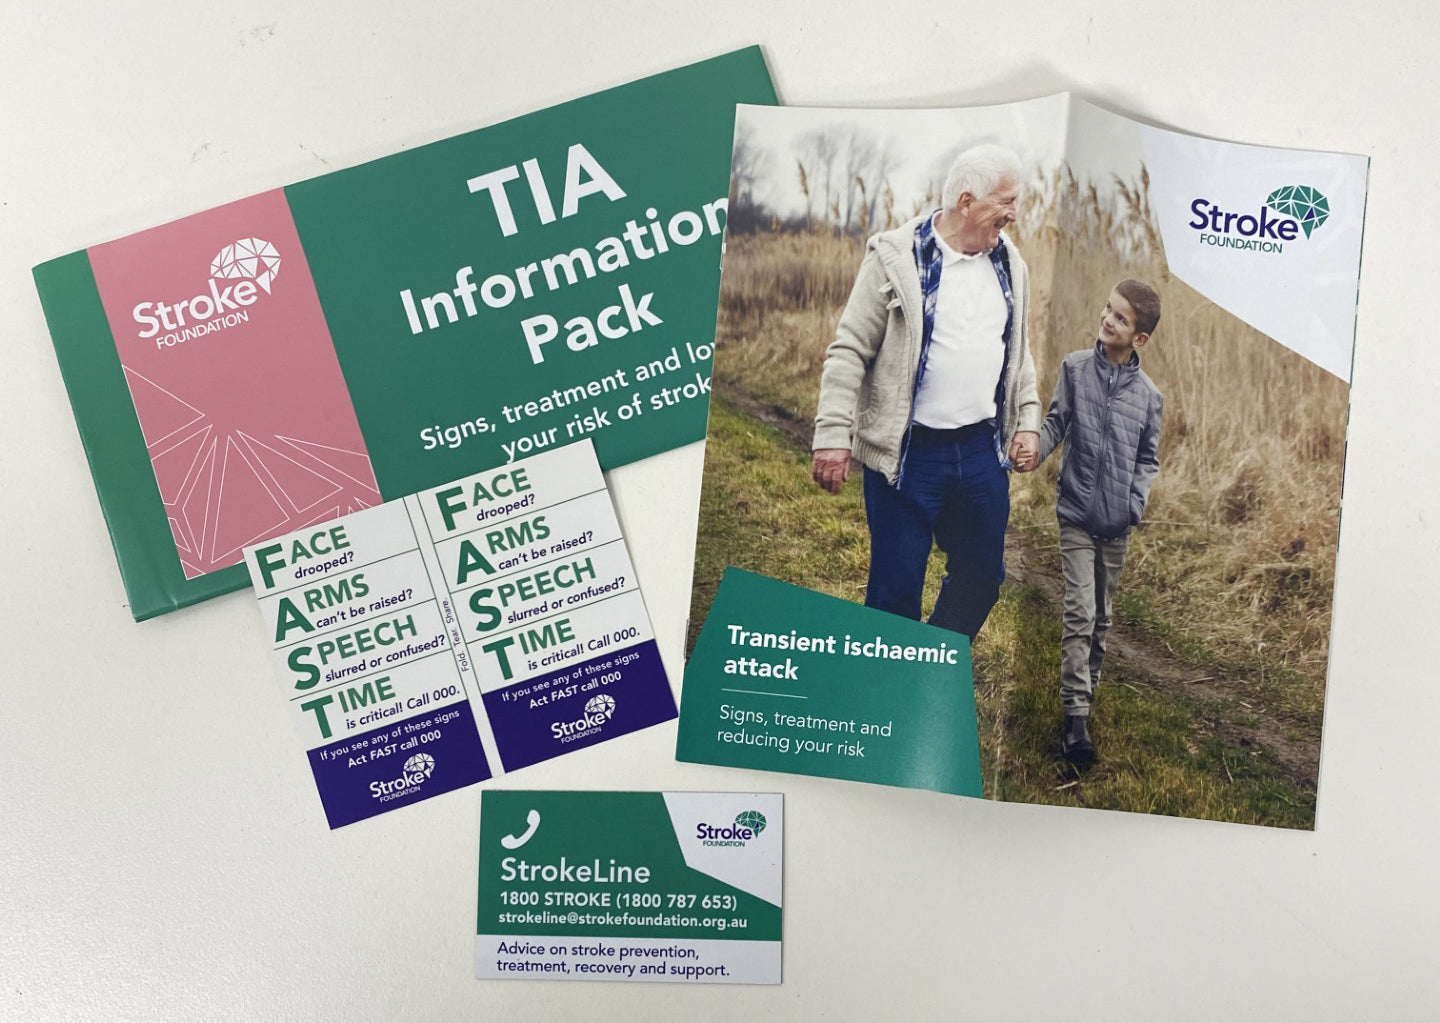 TIA information pack for hospitals